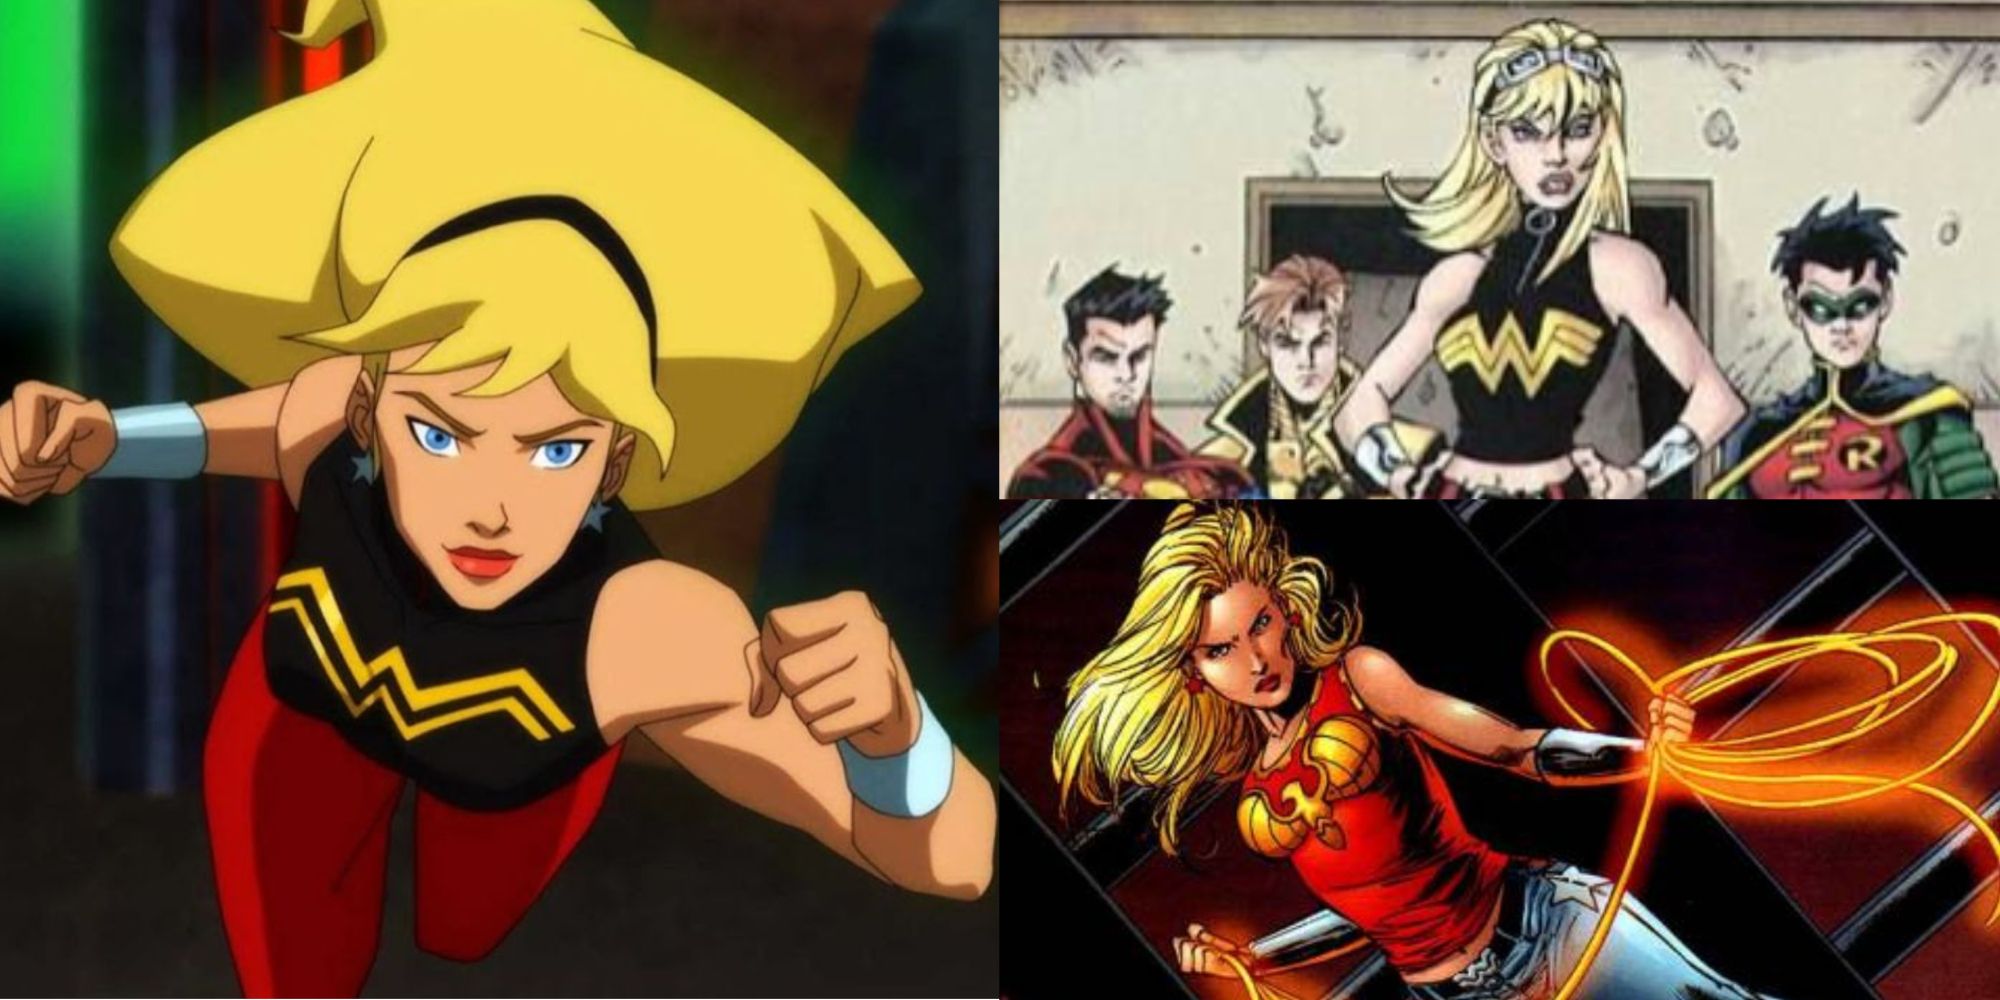 Clockwise from left to right: Cassie Sandsmark as she appears in the Young Justice TV show, Cassie Sandsmark leader her 90s Young Justice teammates, and Cassie Sandsmark in her mid-aughts costume wielding her lasso